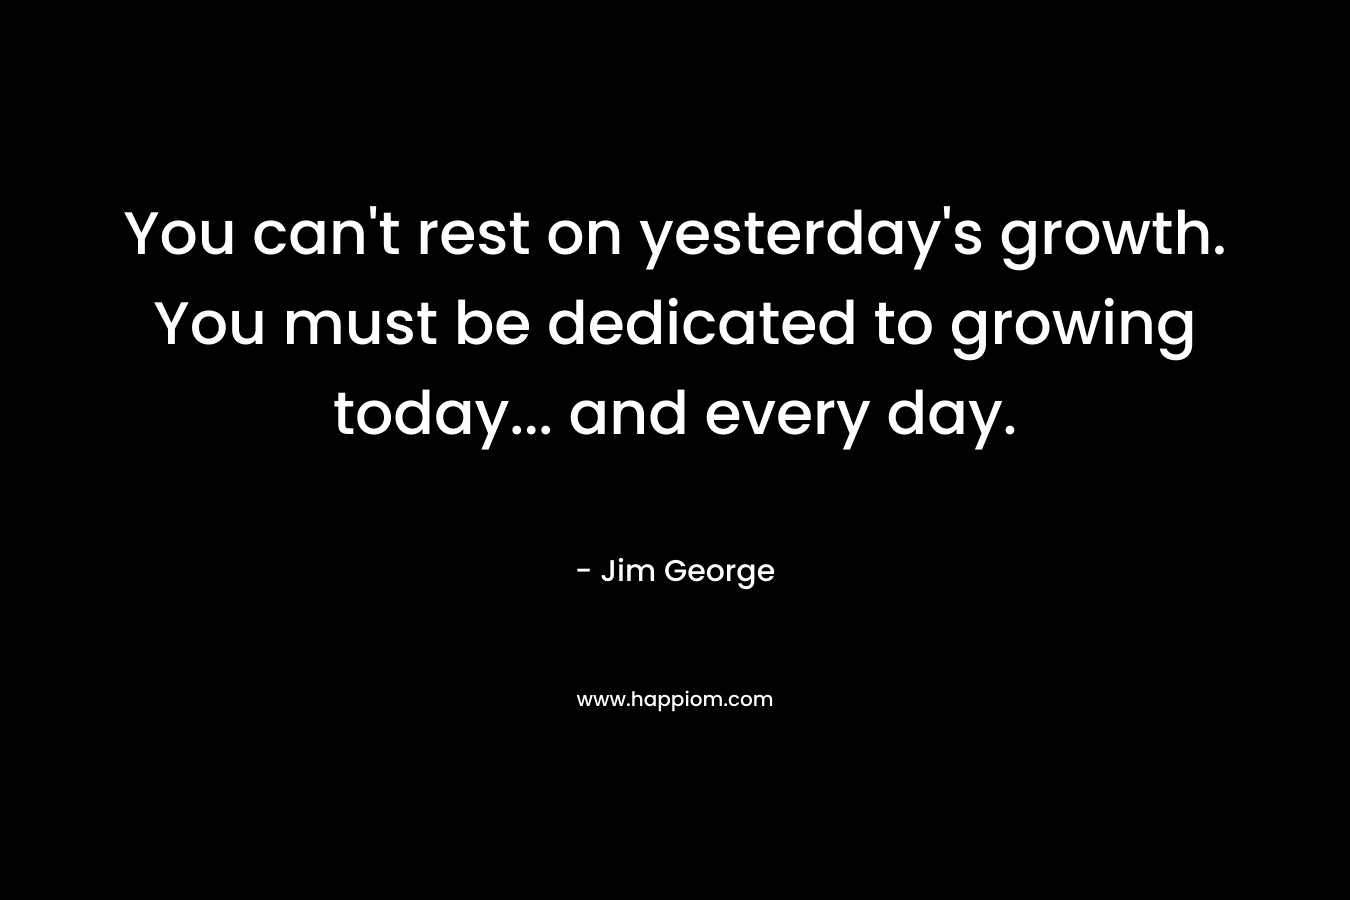 You can't rest on yesterday's growth. You must be dedicated to growing today... and every day.